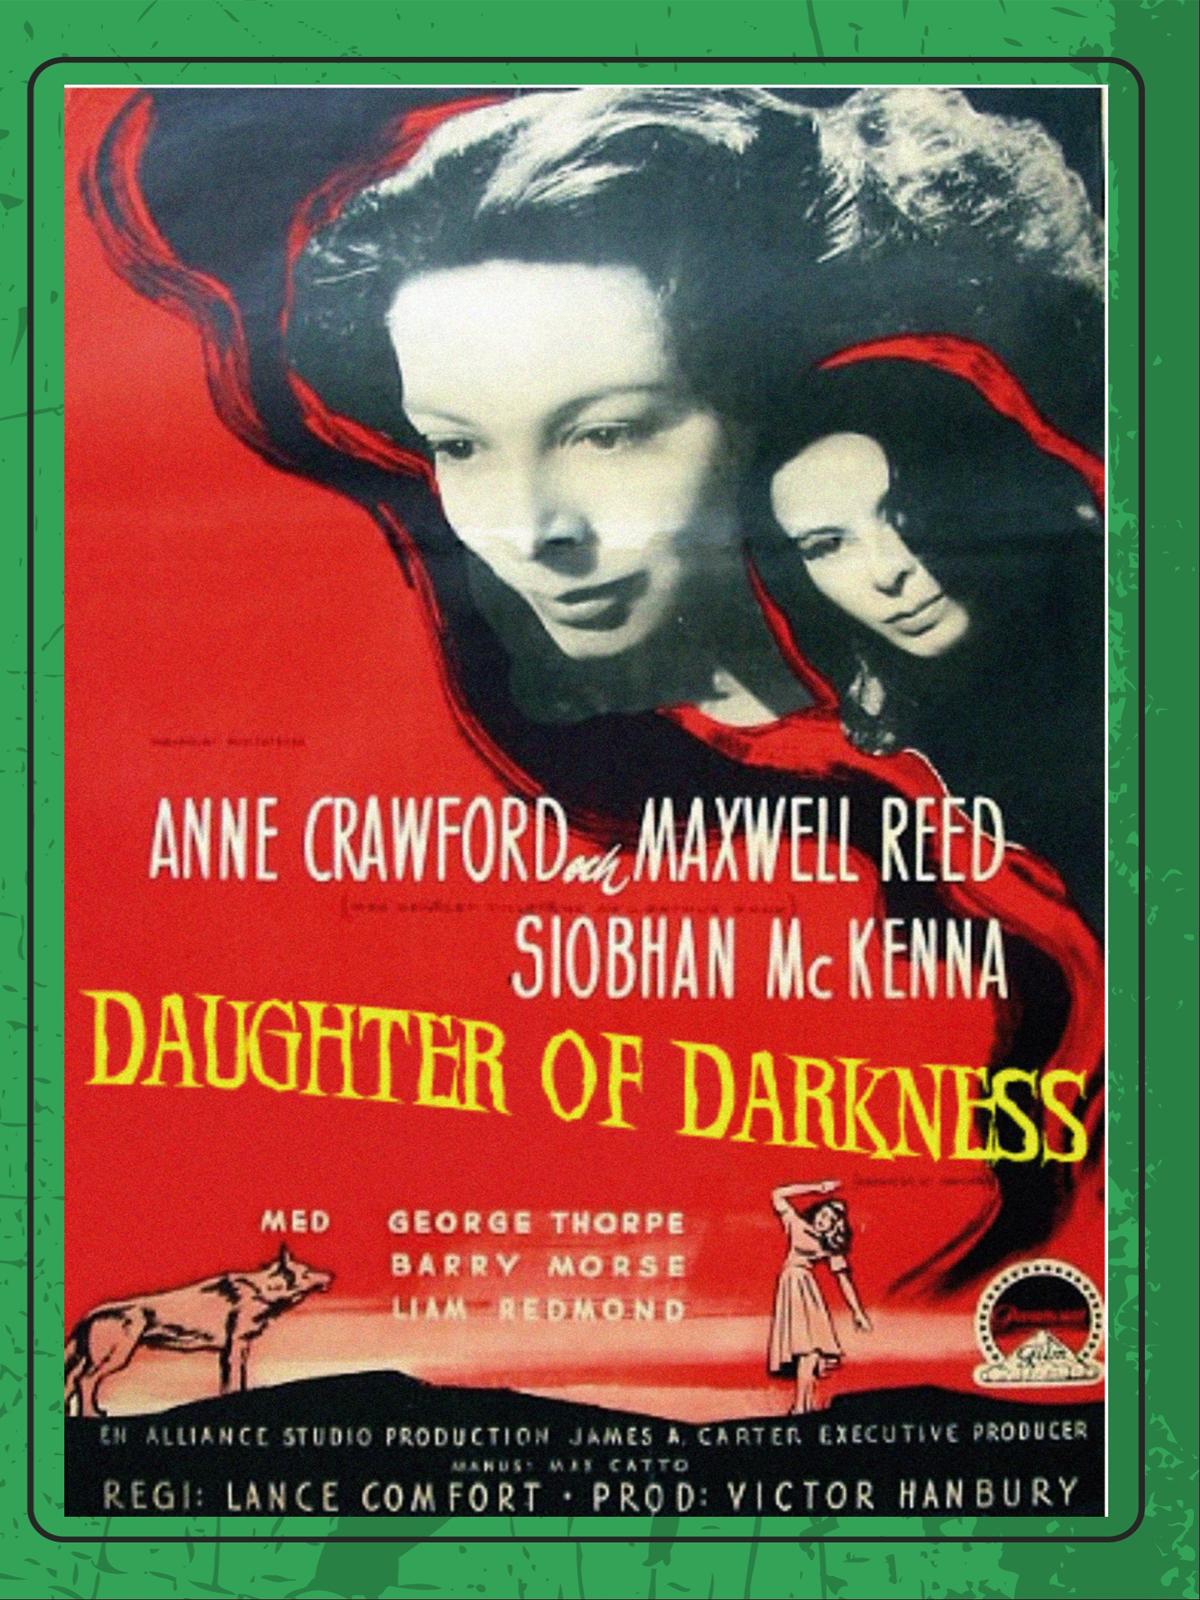 ainal mardhiah recommends Watch Daughter Of Darkness